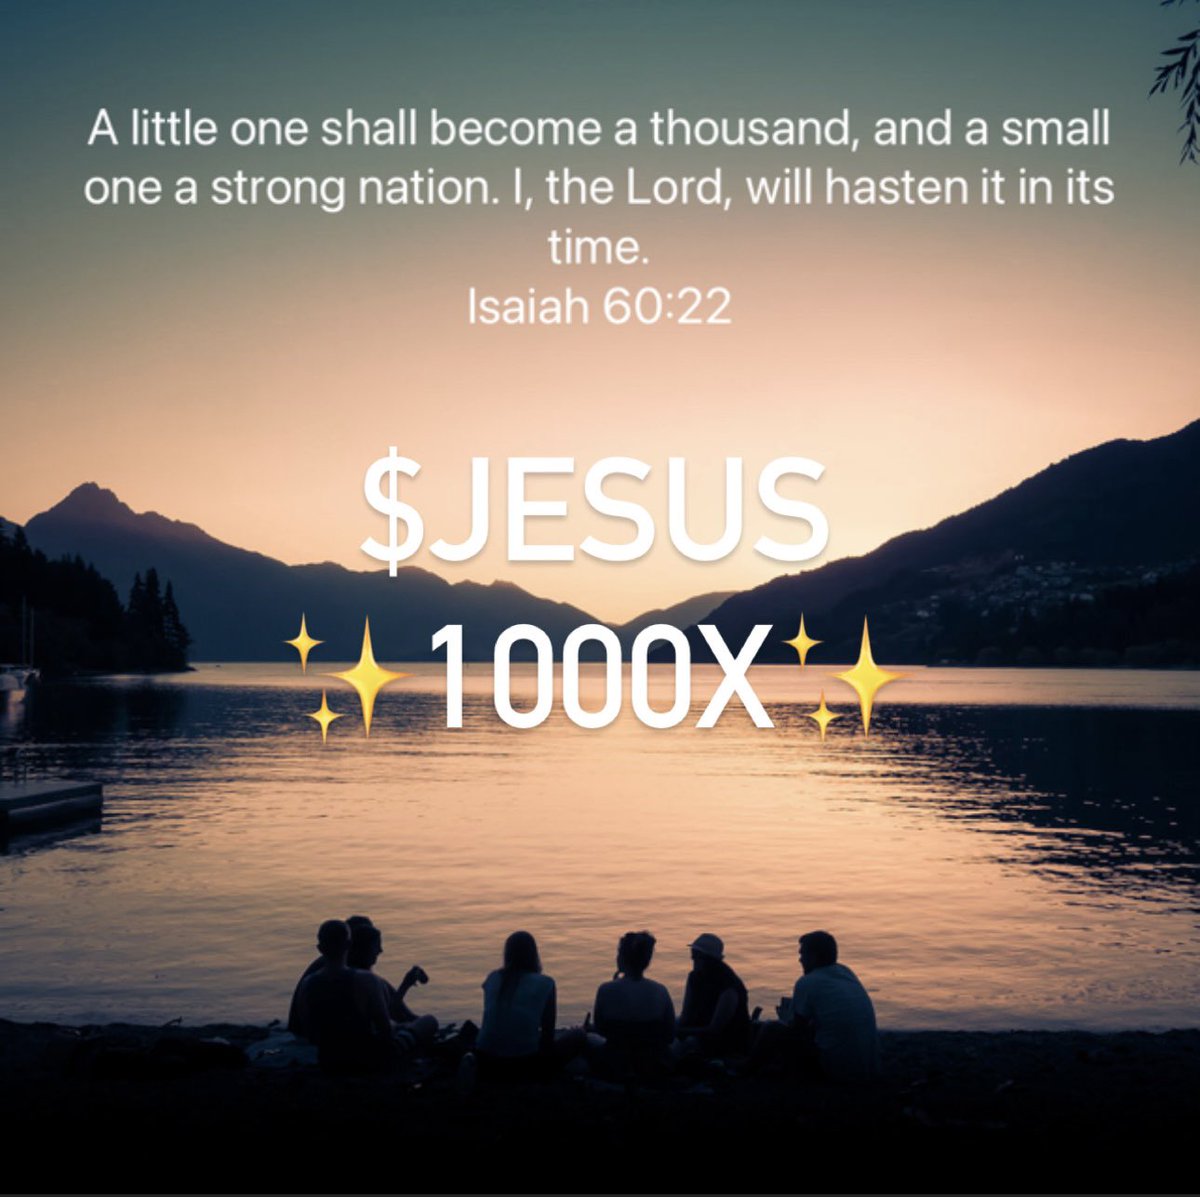 🤩 God just sent me a prophecy, 'shall become a thousand.' This will happen for the glory of God and the whole world will hear from the son of God $JESUS. ✨He is king of kings🙏🏼 Get ready because it will be biblical 1000X #Jesusistheanswer @jesustokens @0xmakerlee  @amtvmedia